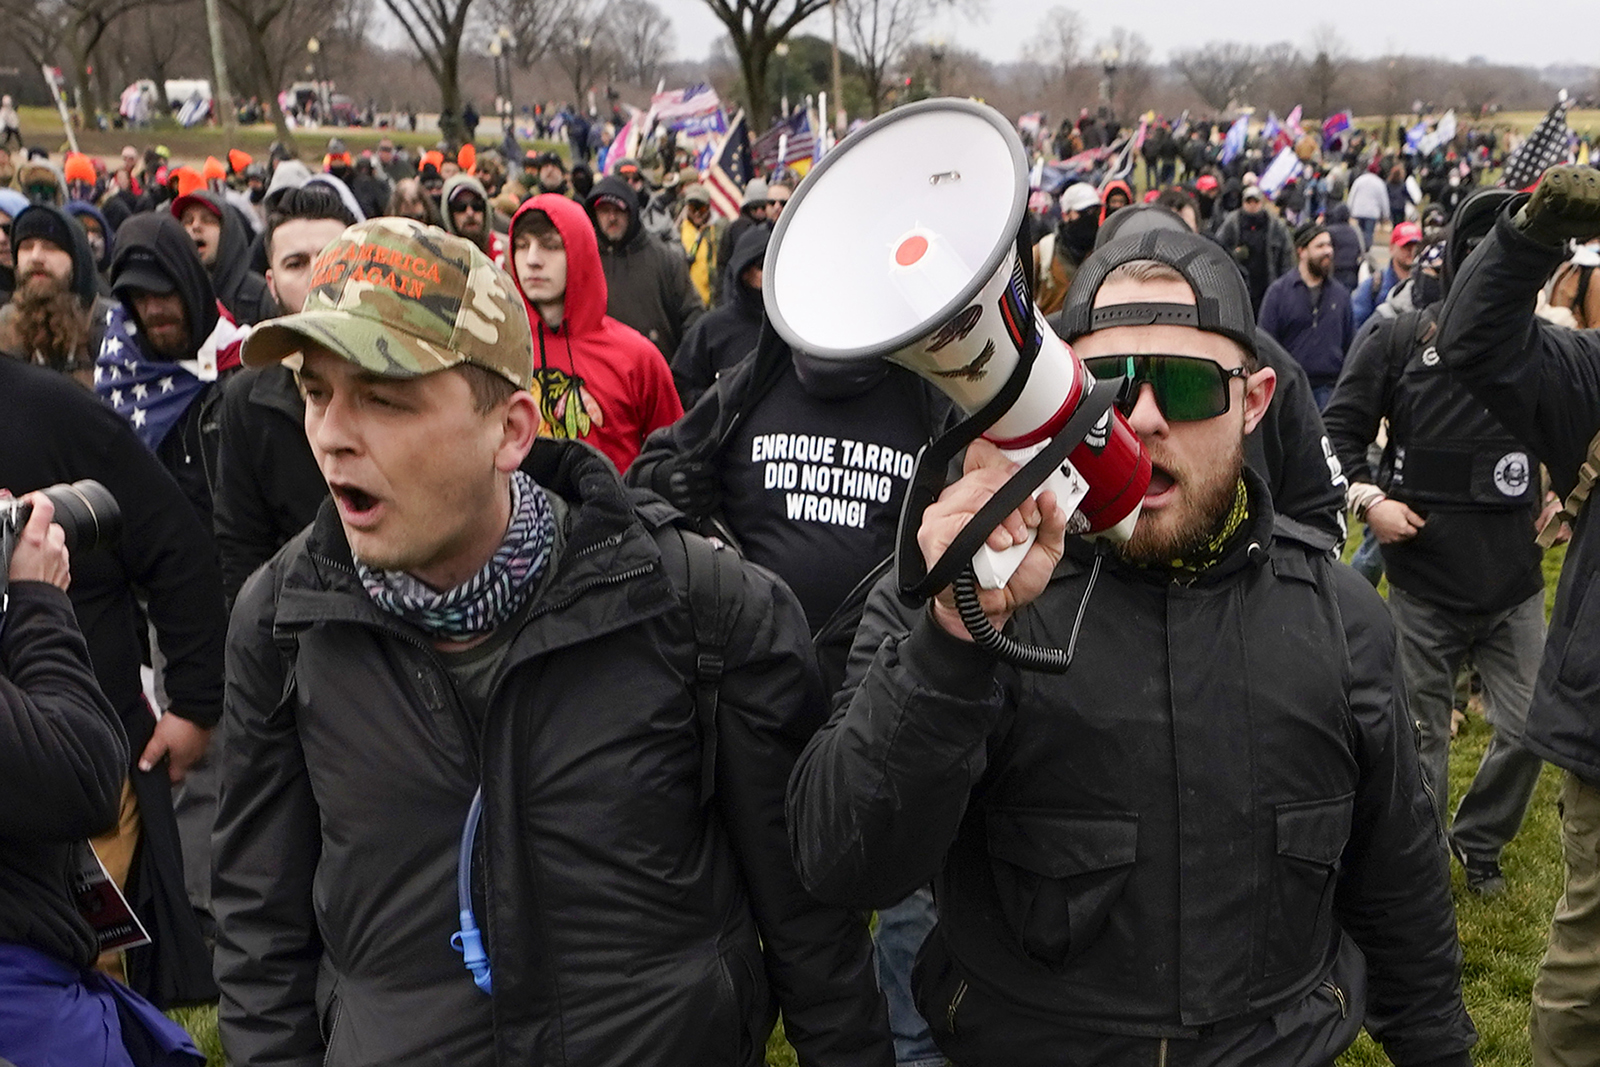 FILE - Proud Boys members Zachary Rehl, left, and Ethan Nordean, left, walk toward the U.S. Capitol in Washington, in support of President Donald Trump on Jan. 6, 2021. A federal judge on Tuesday, Dec. 28 refused to dismiss an indictment charging four alleged leaders of the far-right Proud Boys, Ethan Nordean, Joseph Biggs, Zachary Rehl and Charles Donohoe, with conspiring to attack the U.S. Capitol to stop Congress from certifying President Joe Biden's electoral victory. (AP Photo/Carolyn Kaster, File)